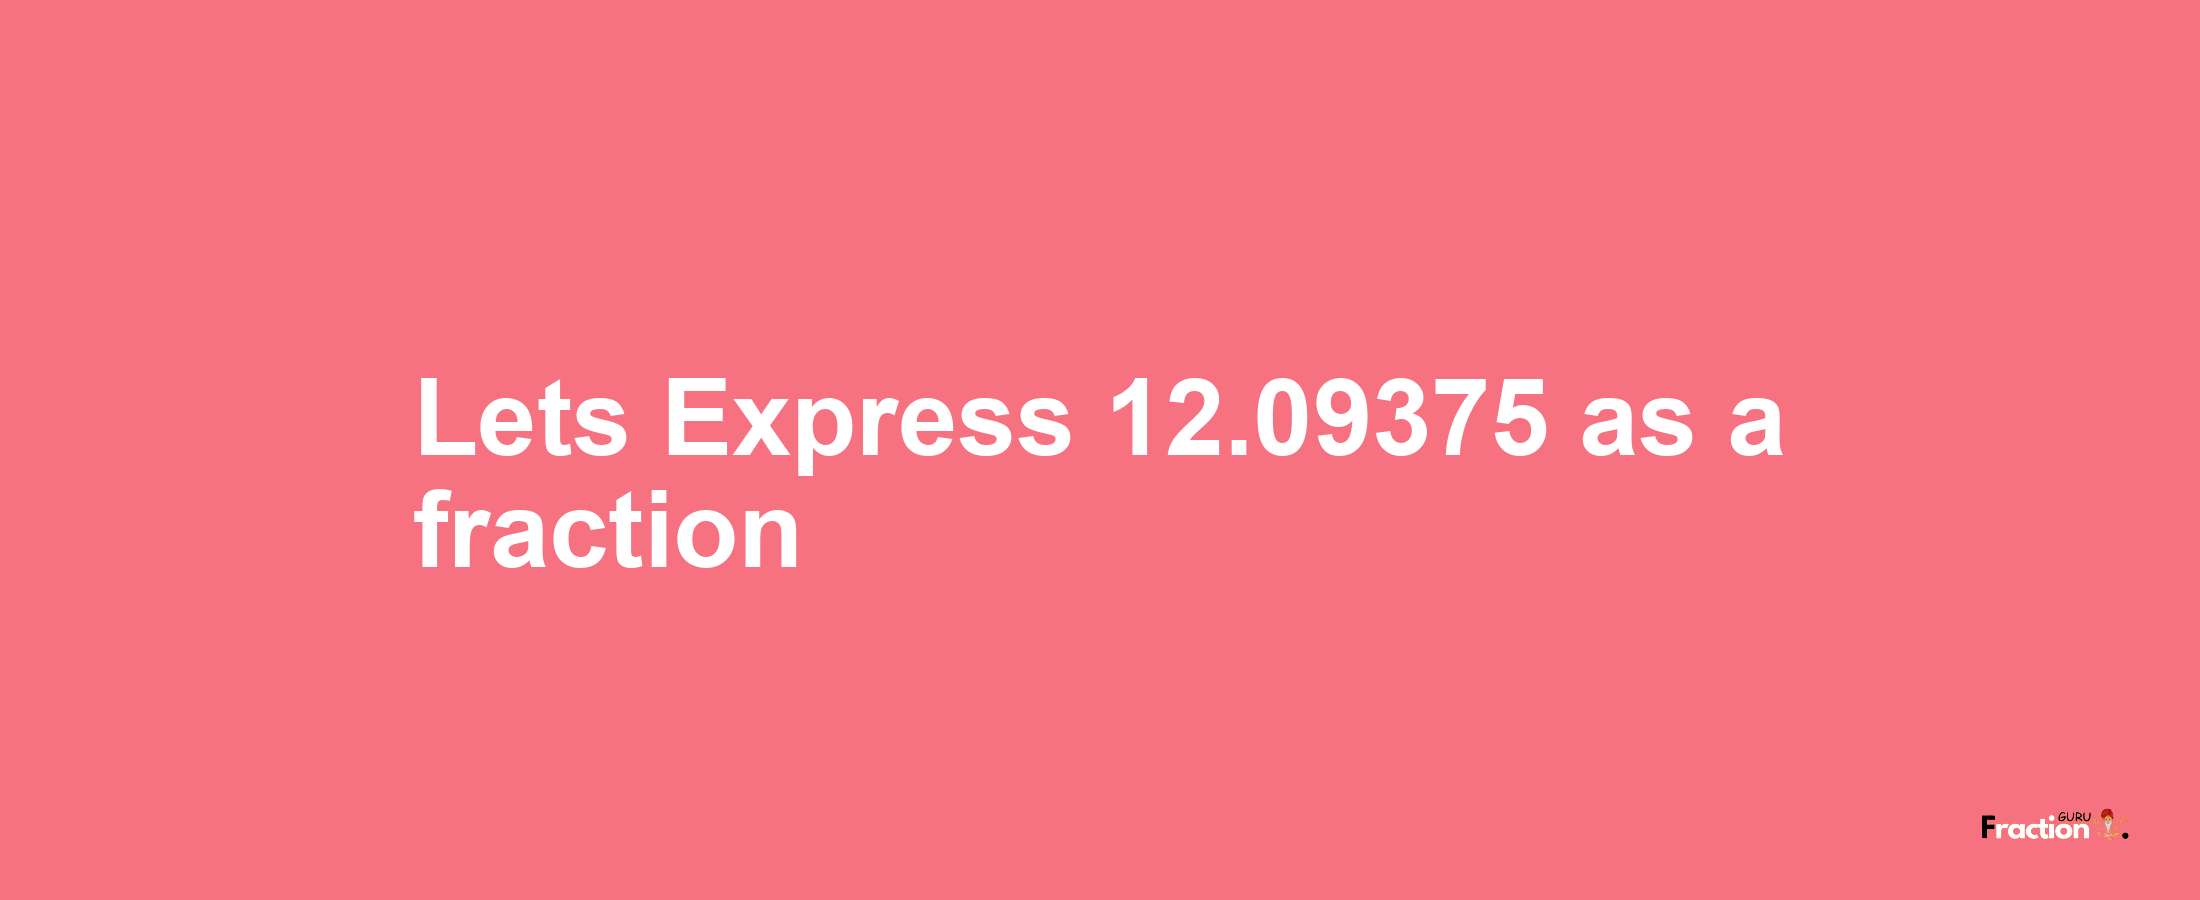 Lets Express 12.09375 as afraction